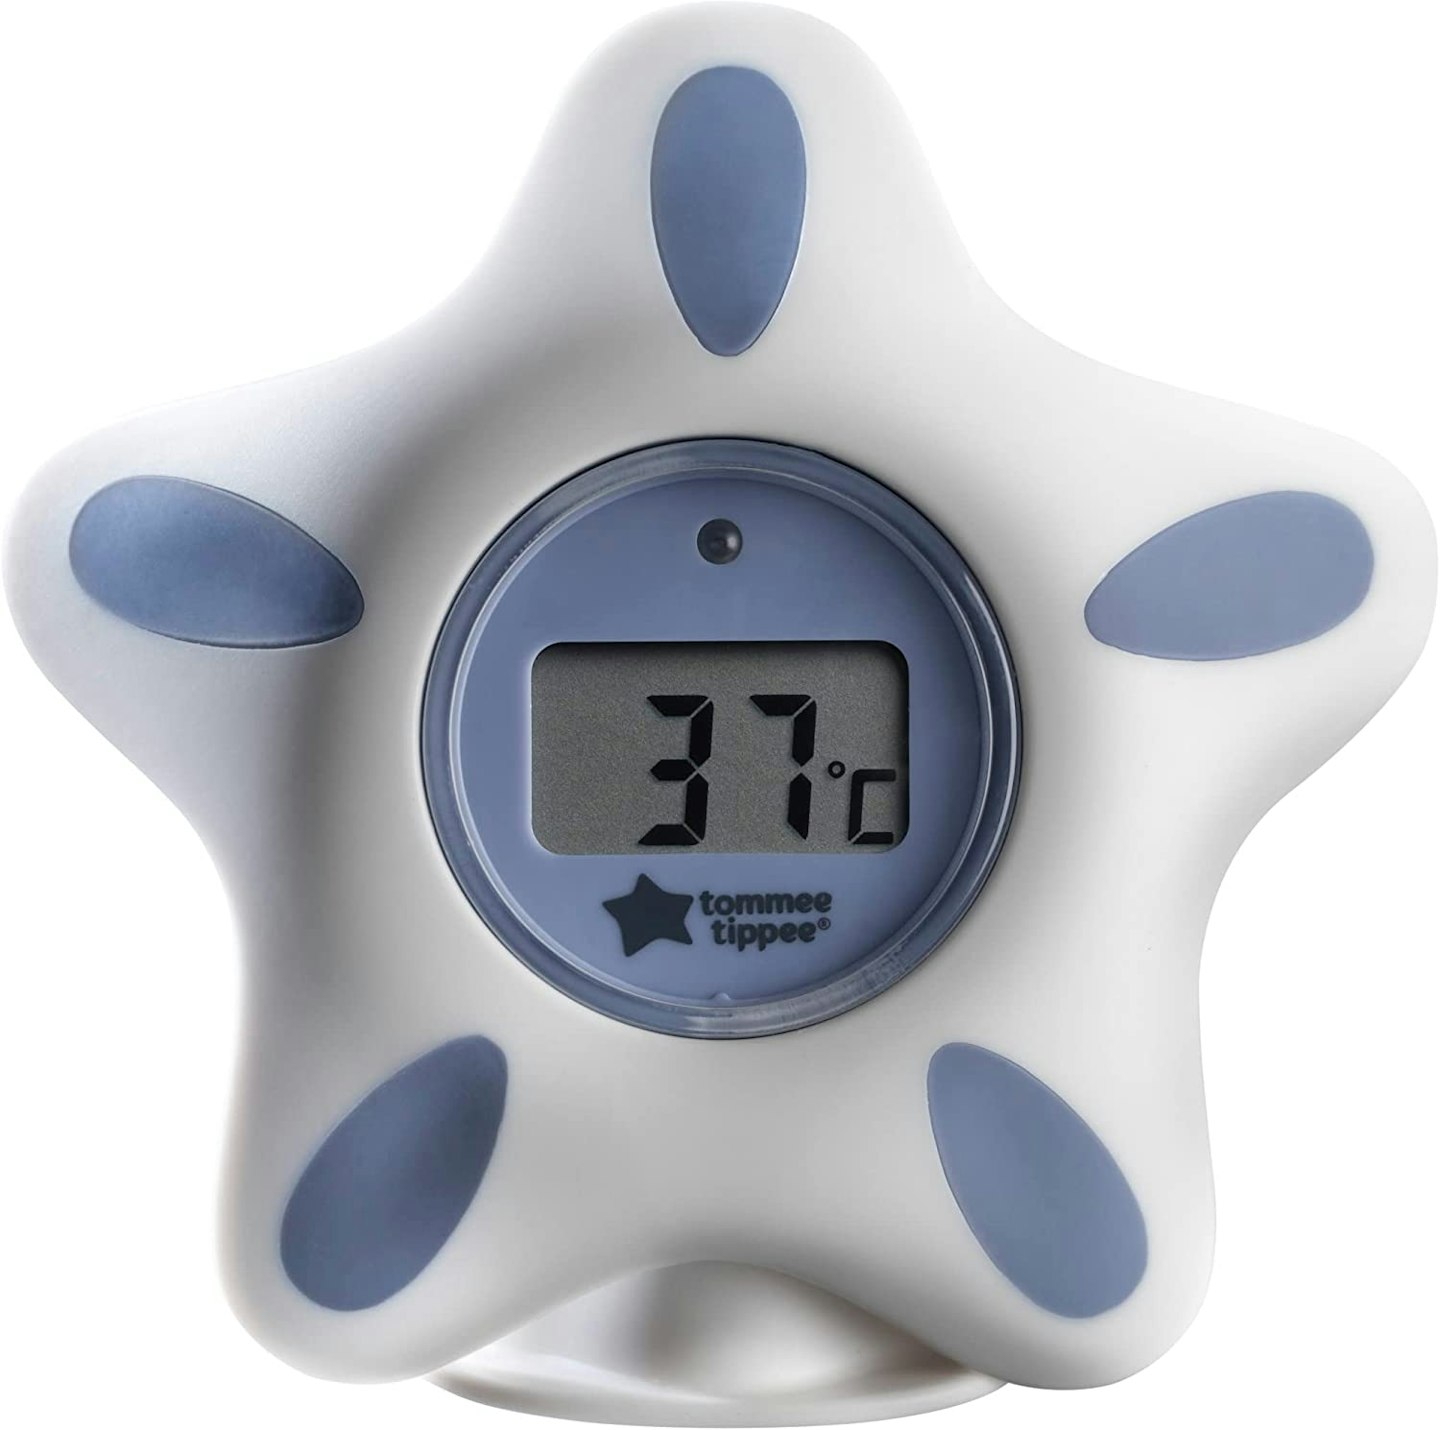 Indoor Thermometer Alarm Clock Display Digital Room Thermometer